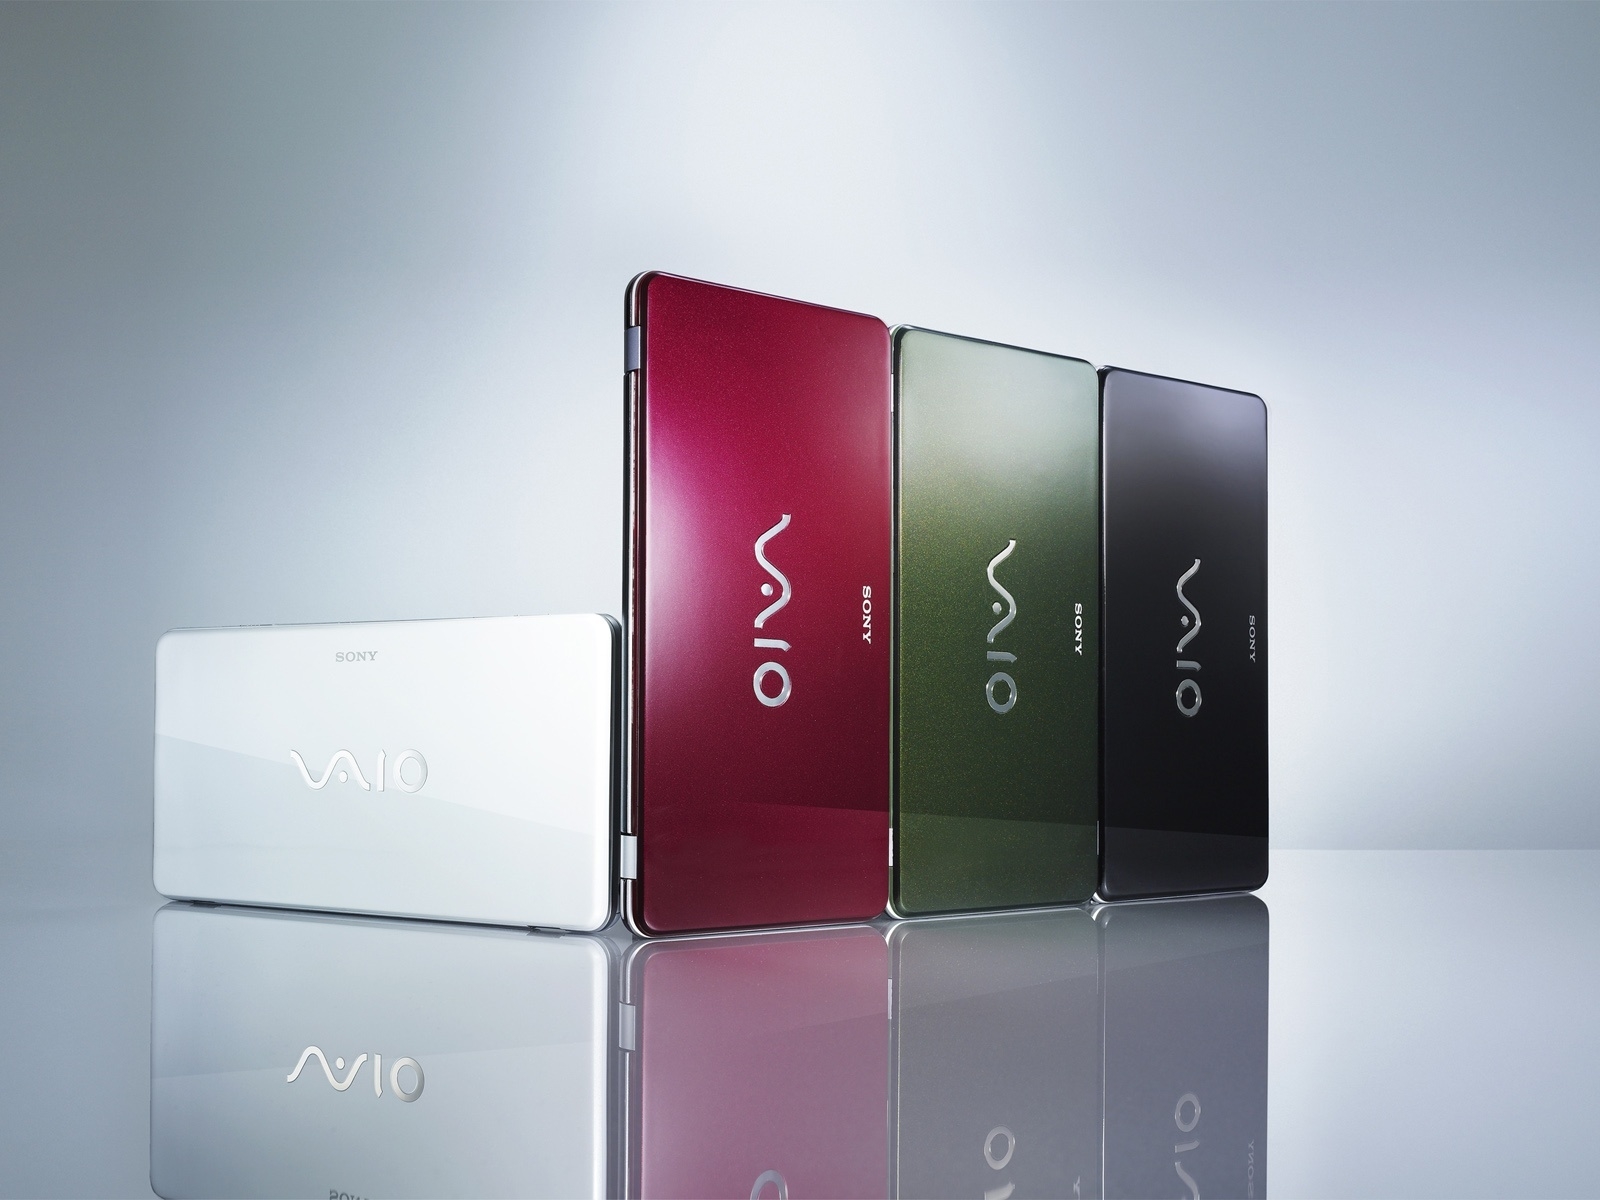 Sony Vaio 4 colors for 1600 x 1200 resolution